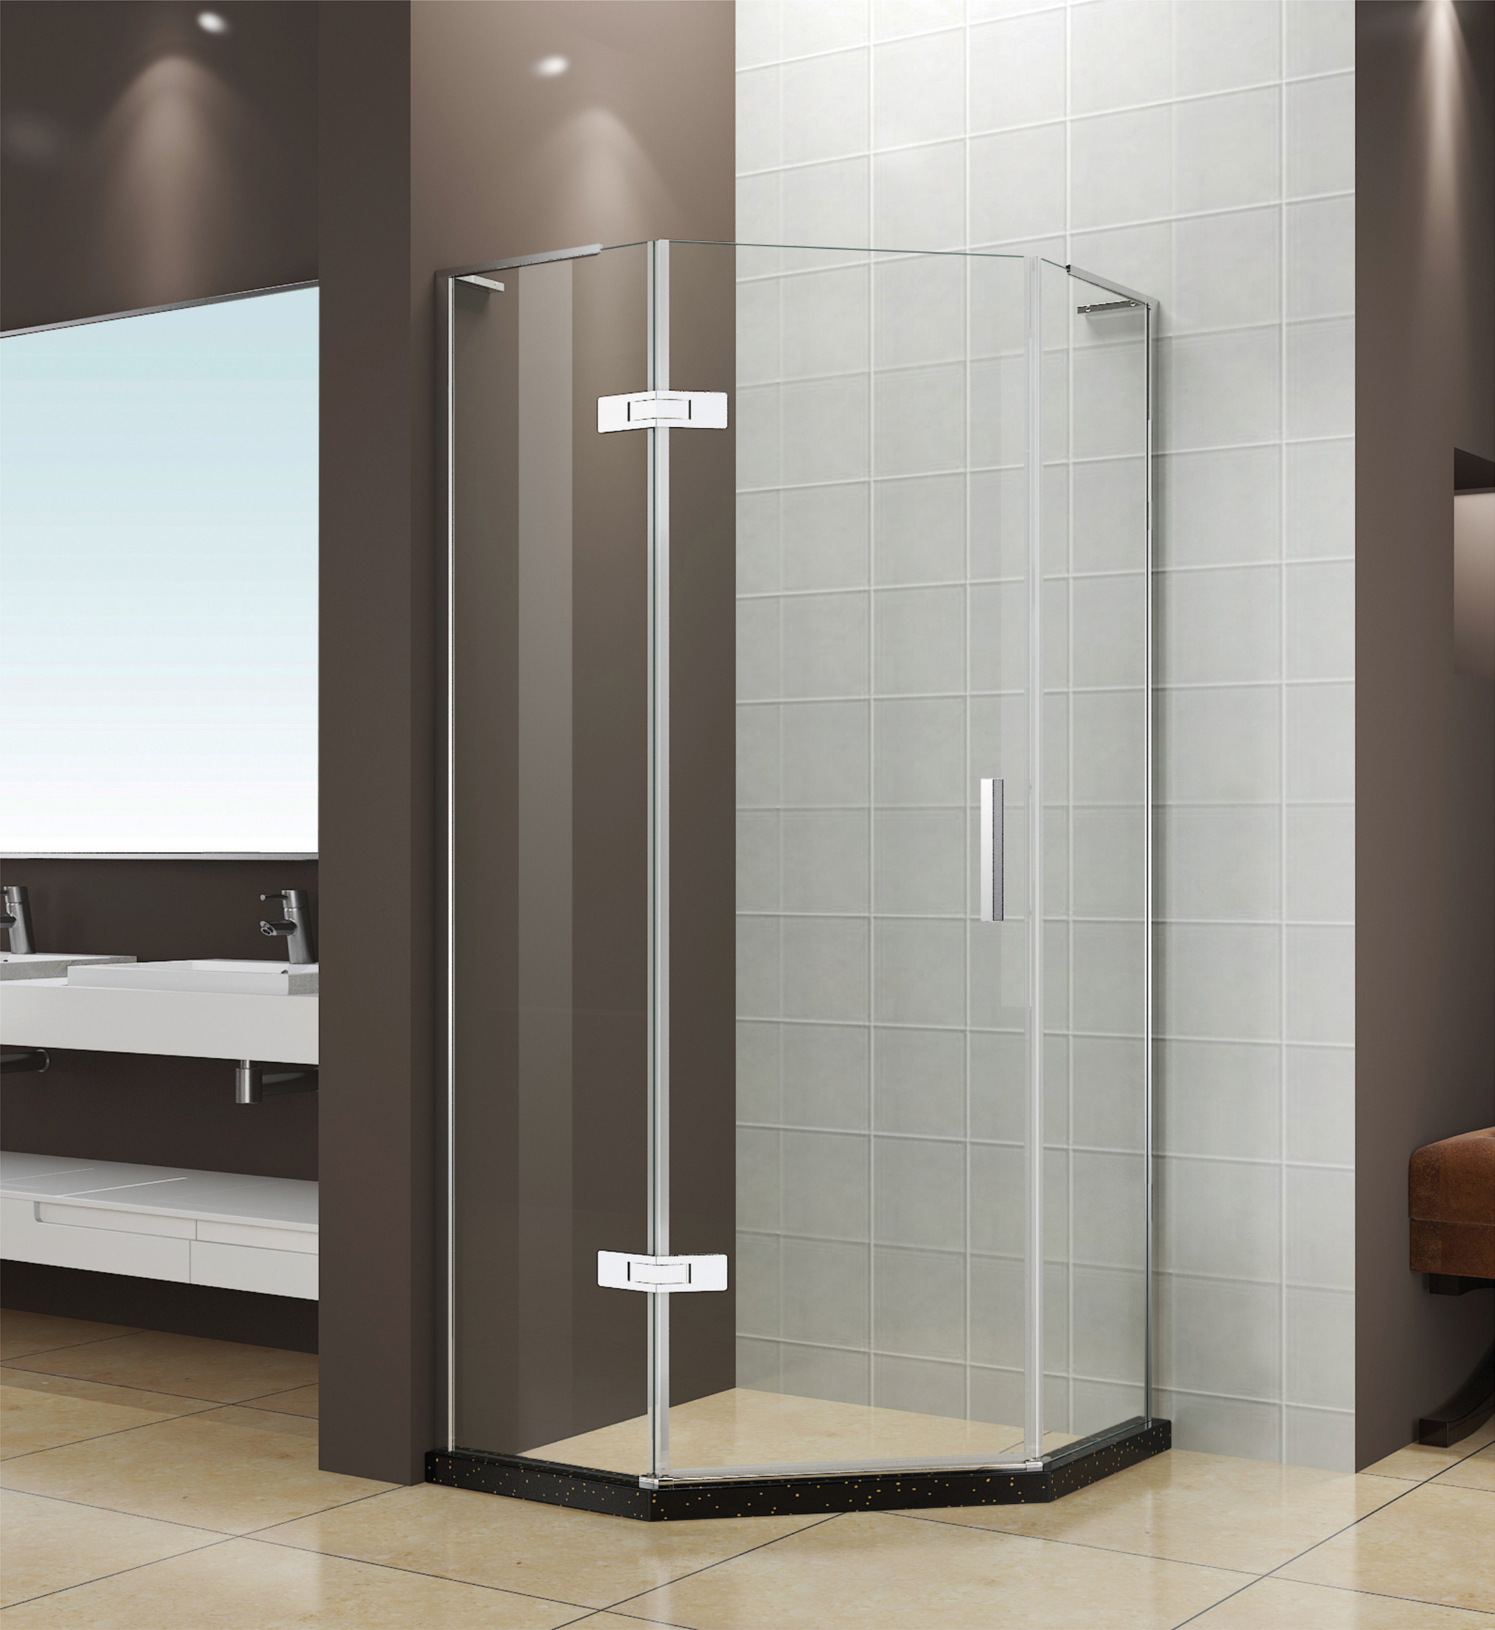  2020 New Bathroom Shower Doors Walk in Style Transparency Clearly Glass with Black Tray